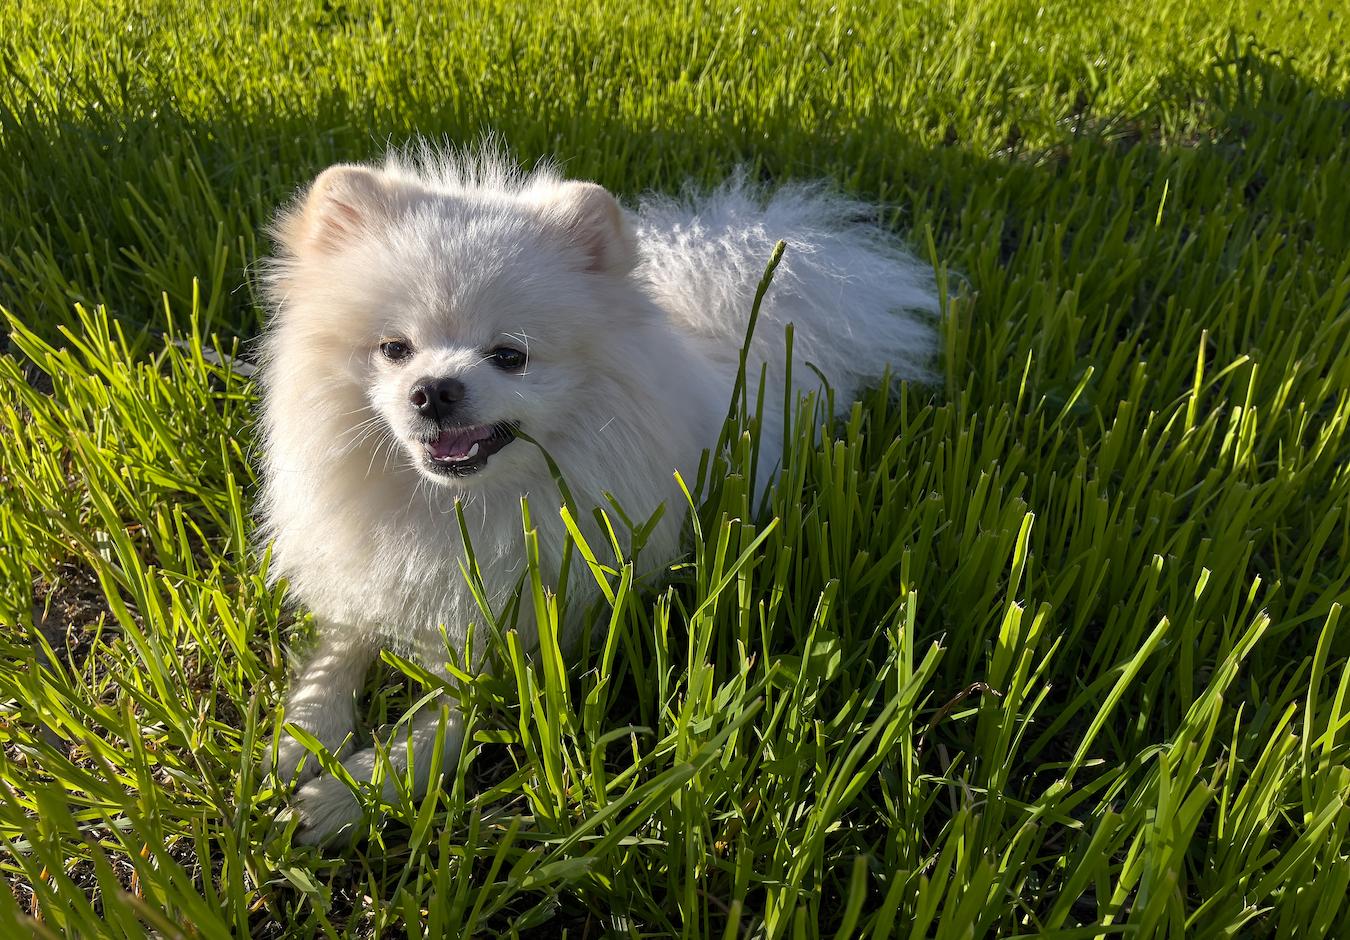 dog laying in grass and eating grass many dogs eaten grass dogs eat grass eats grass dogs eat grass dogs eat grass dog